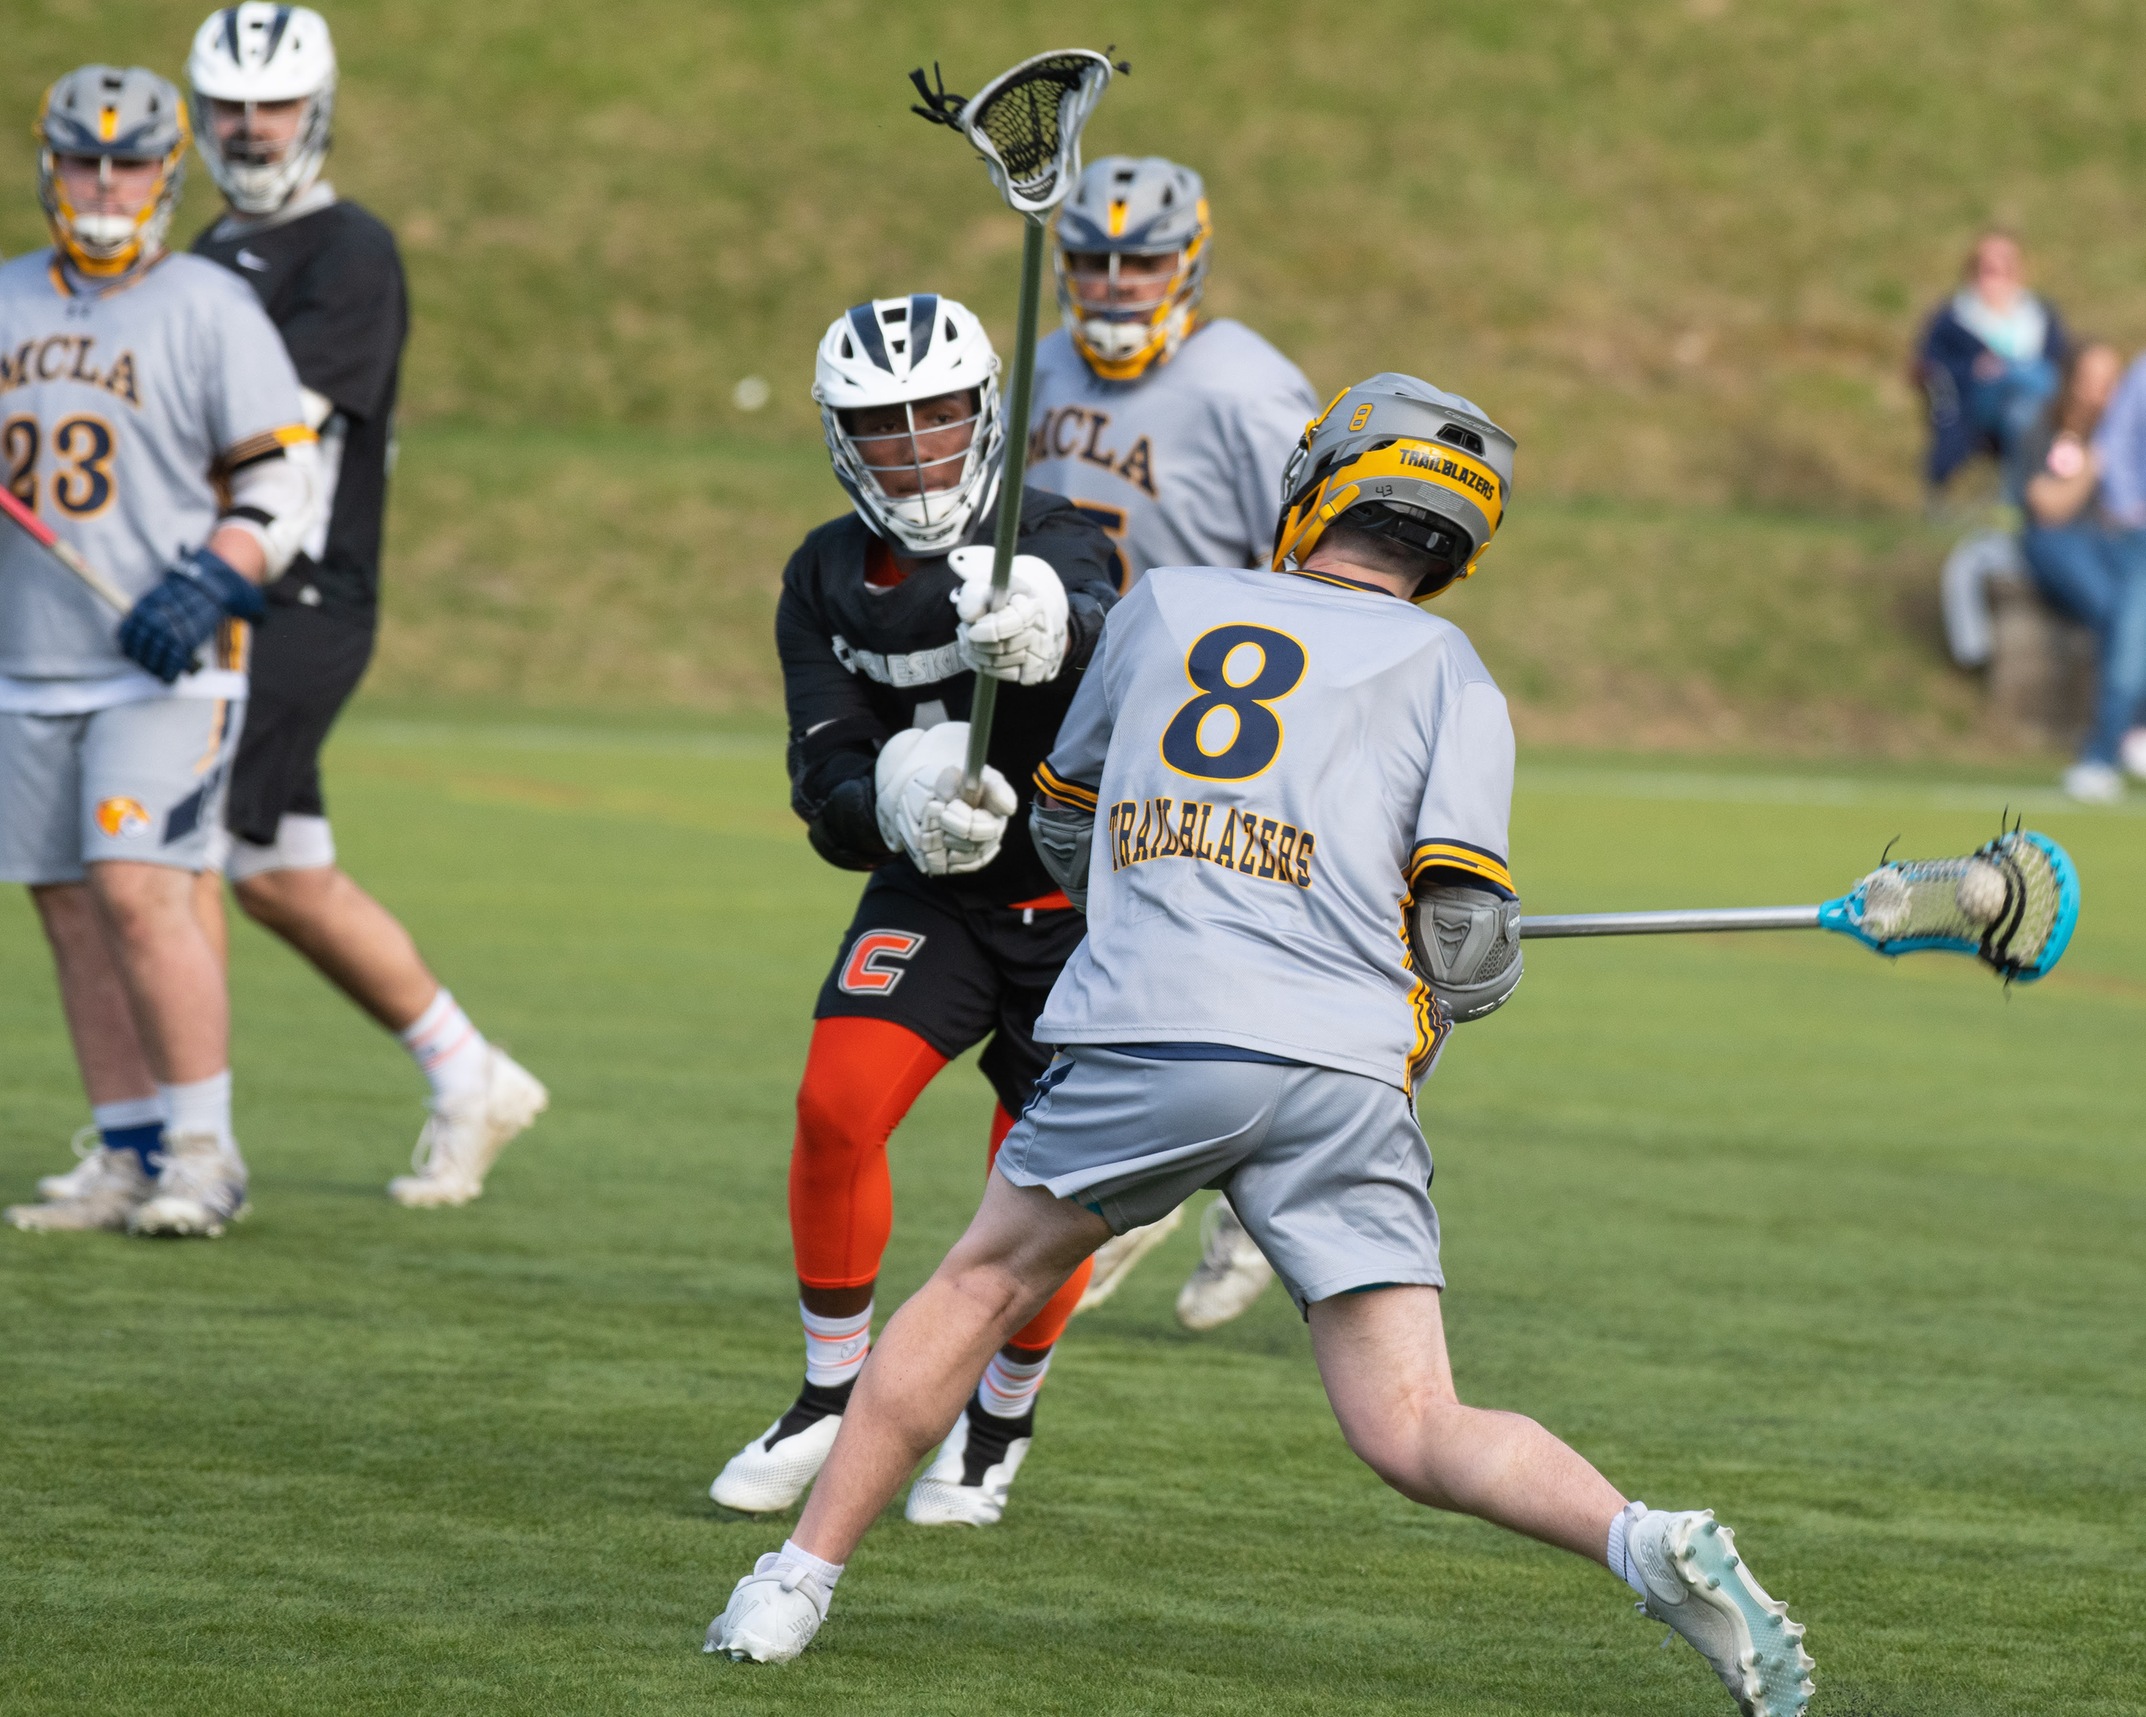 Men's Lacrosse falls to Husson in NAC action